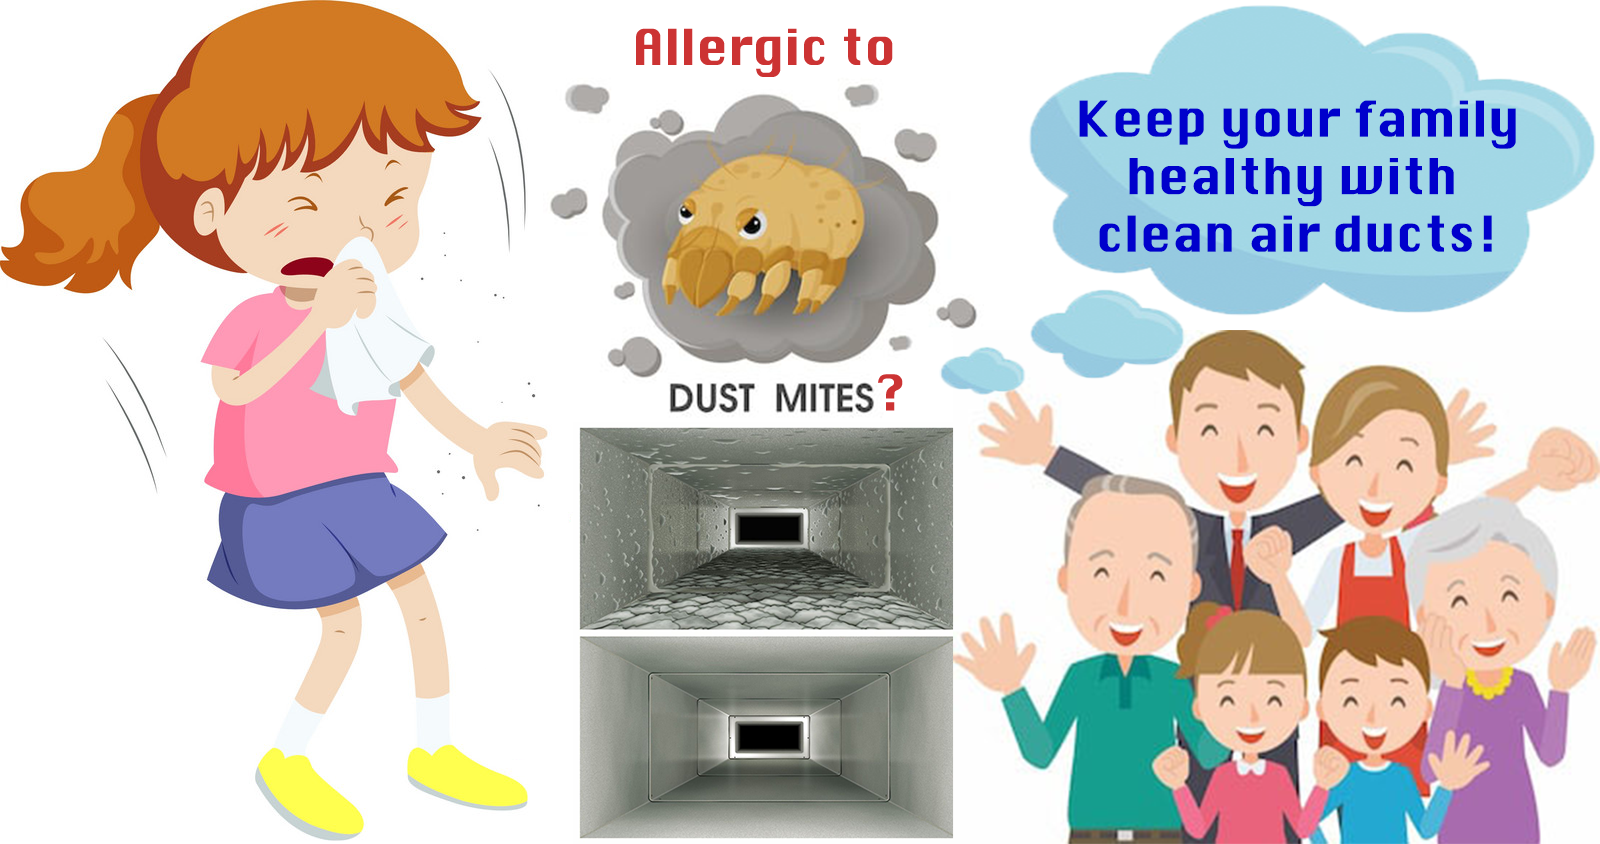 Air duct cleaning to reduce allergens